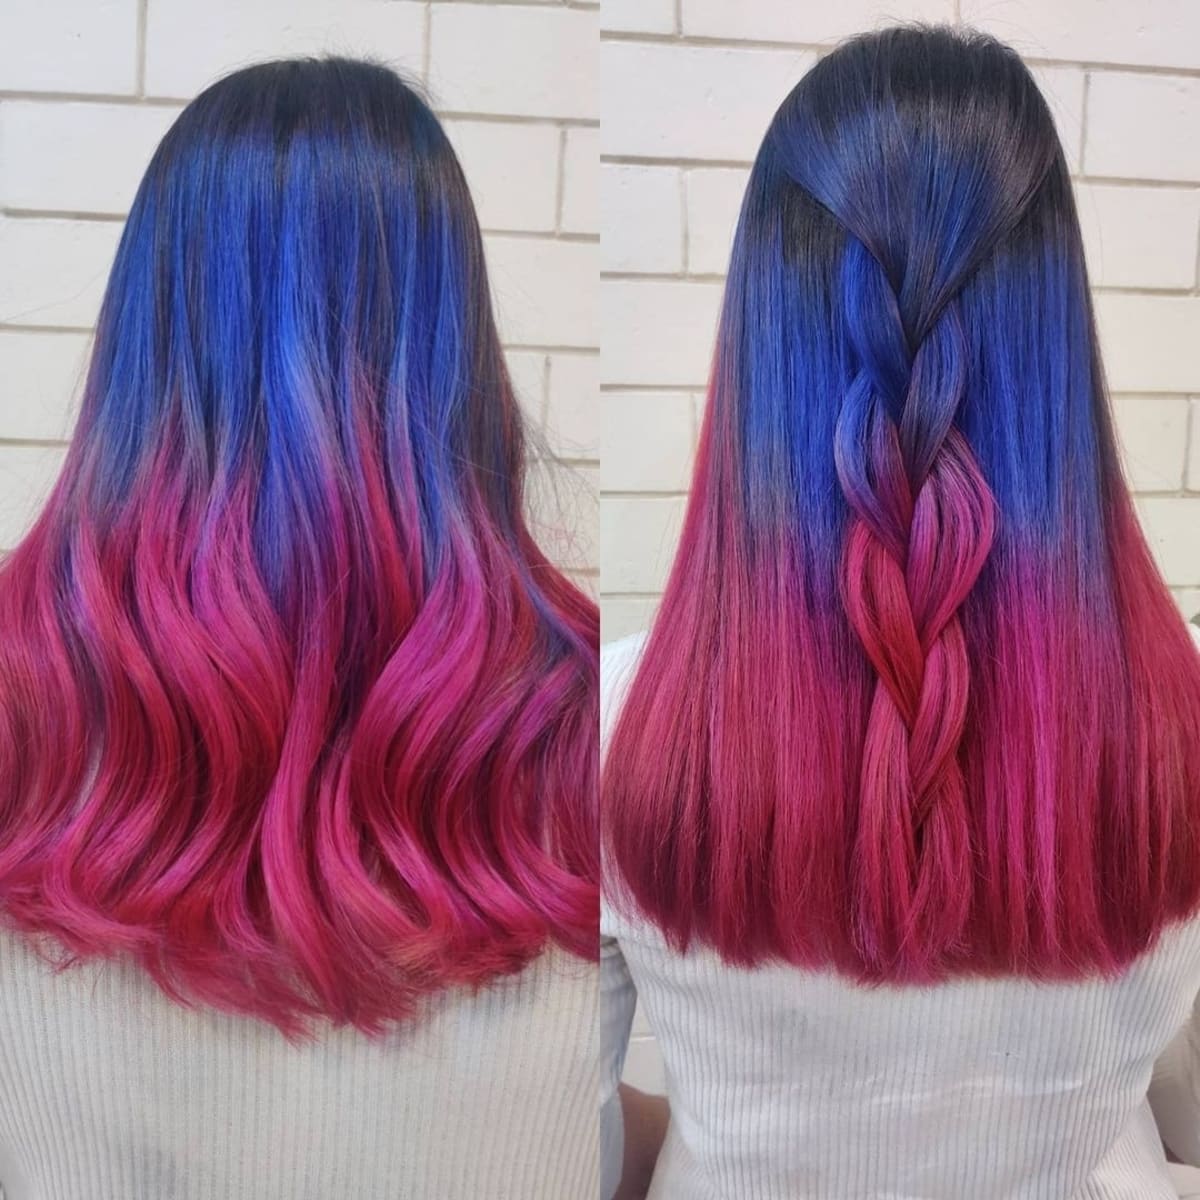 Blue to pink hair ombre